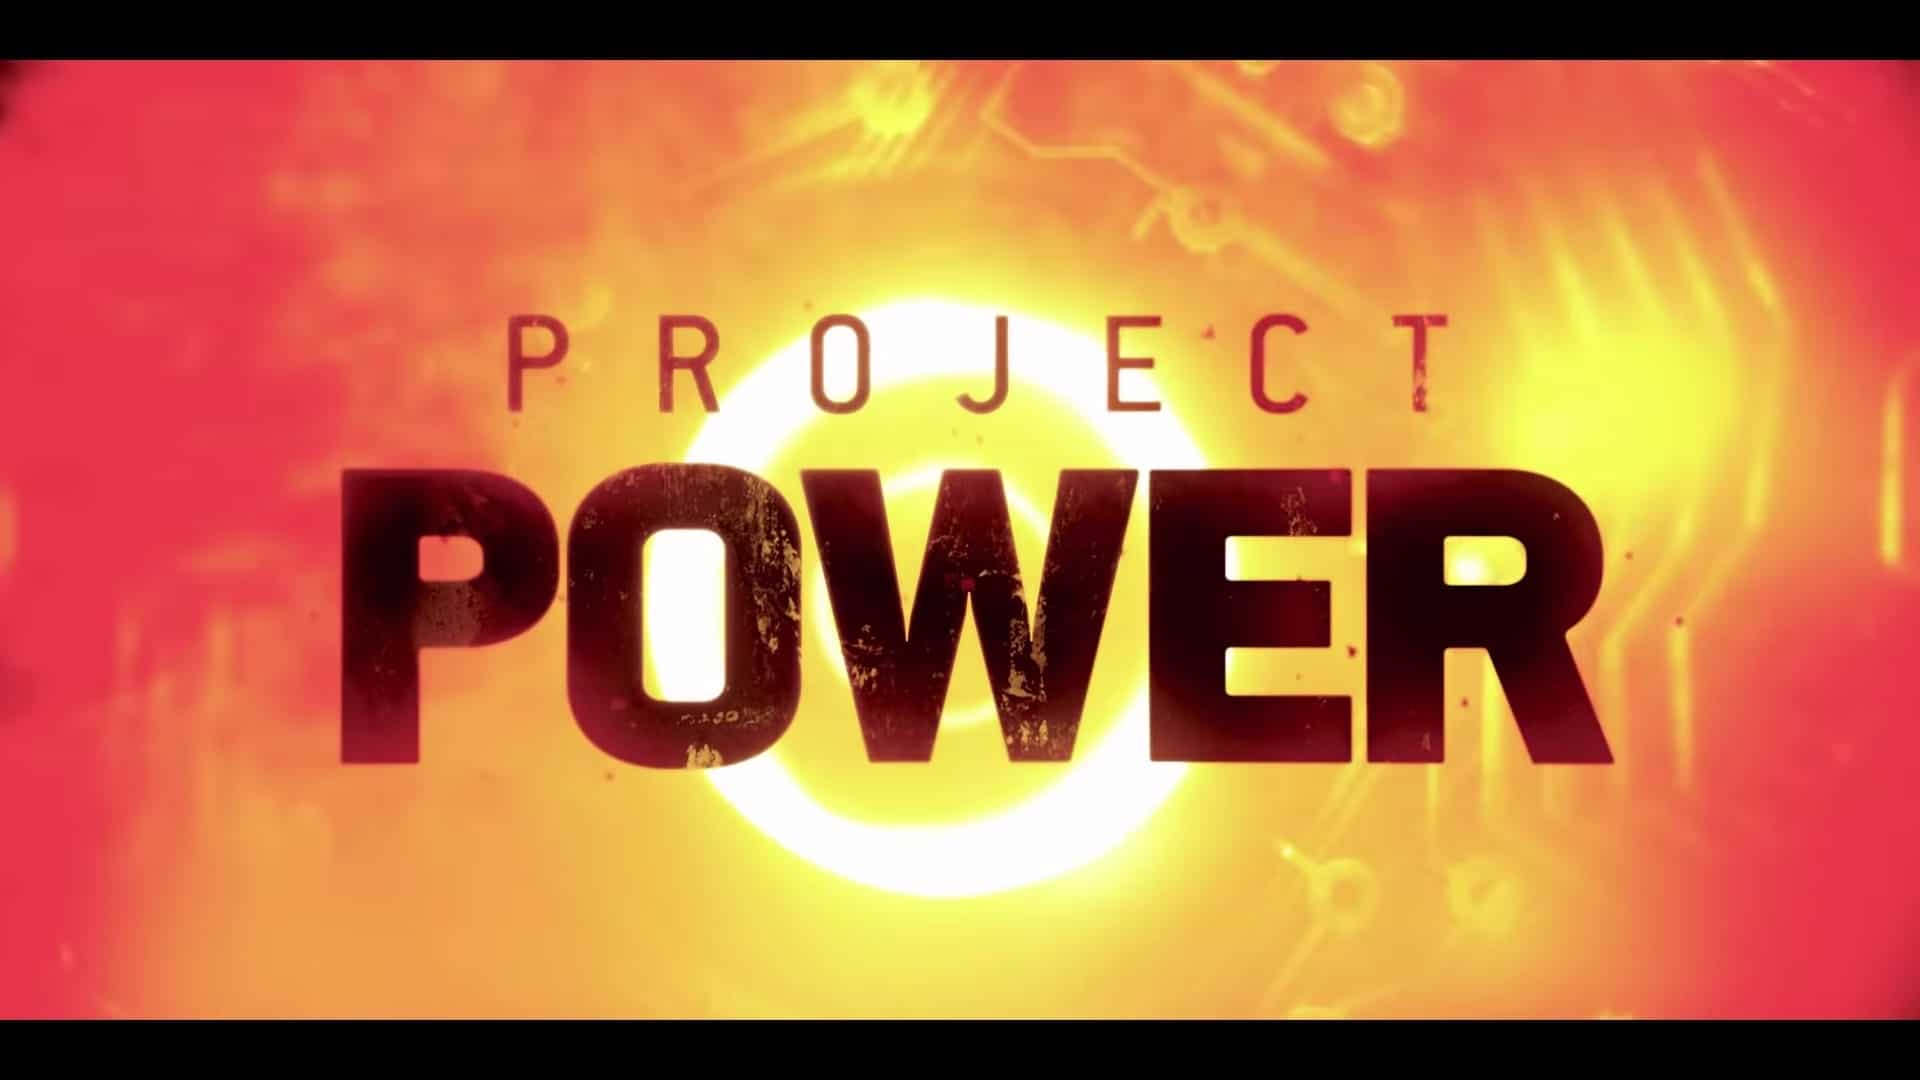 Netflix Project Power Trailer, Netflix Action Movies, Netflix Sci-Fi Movies, Coming to Netflix in August 2020